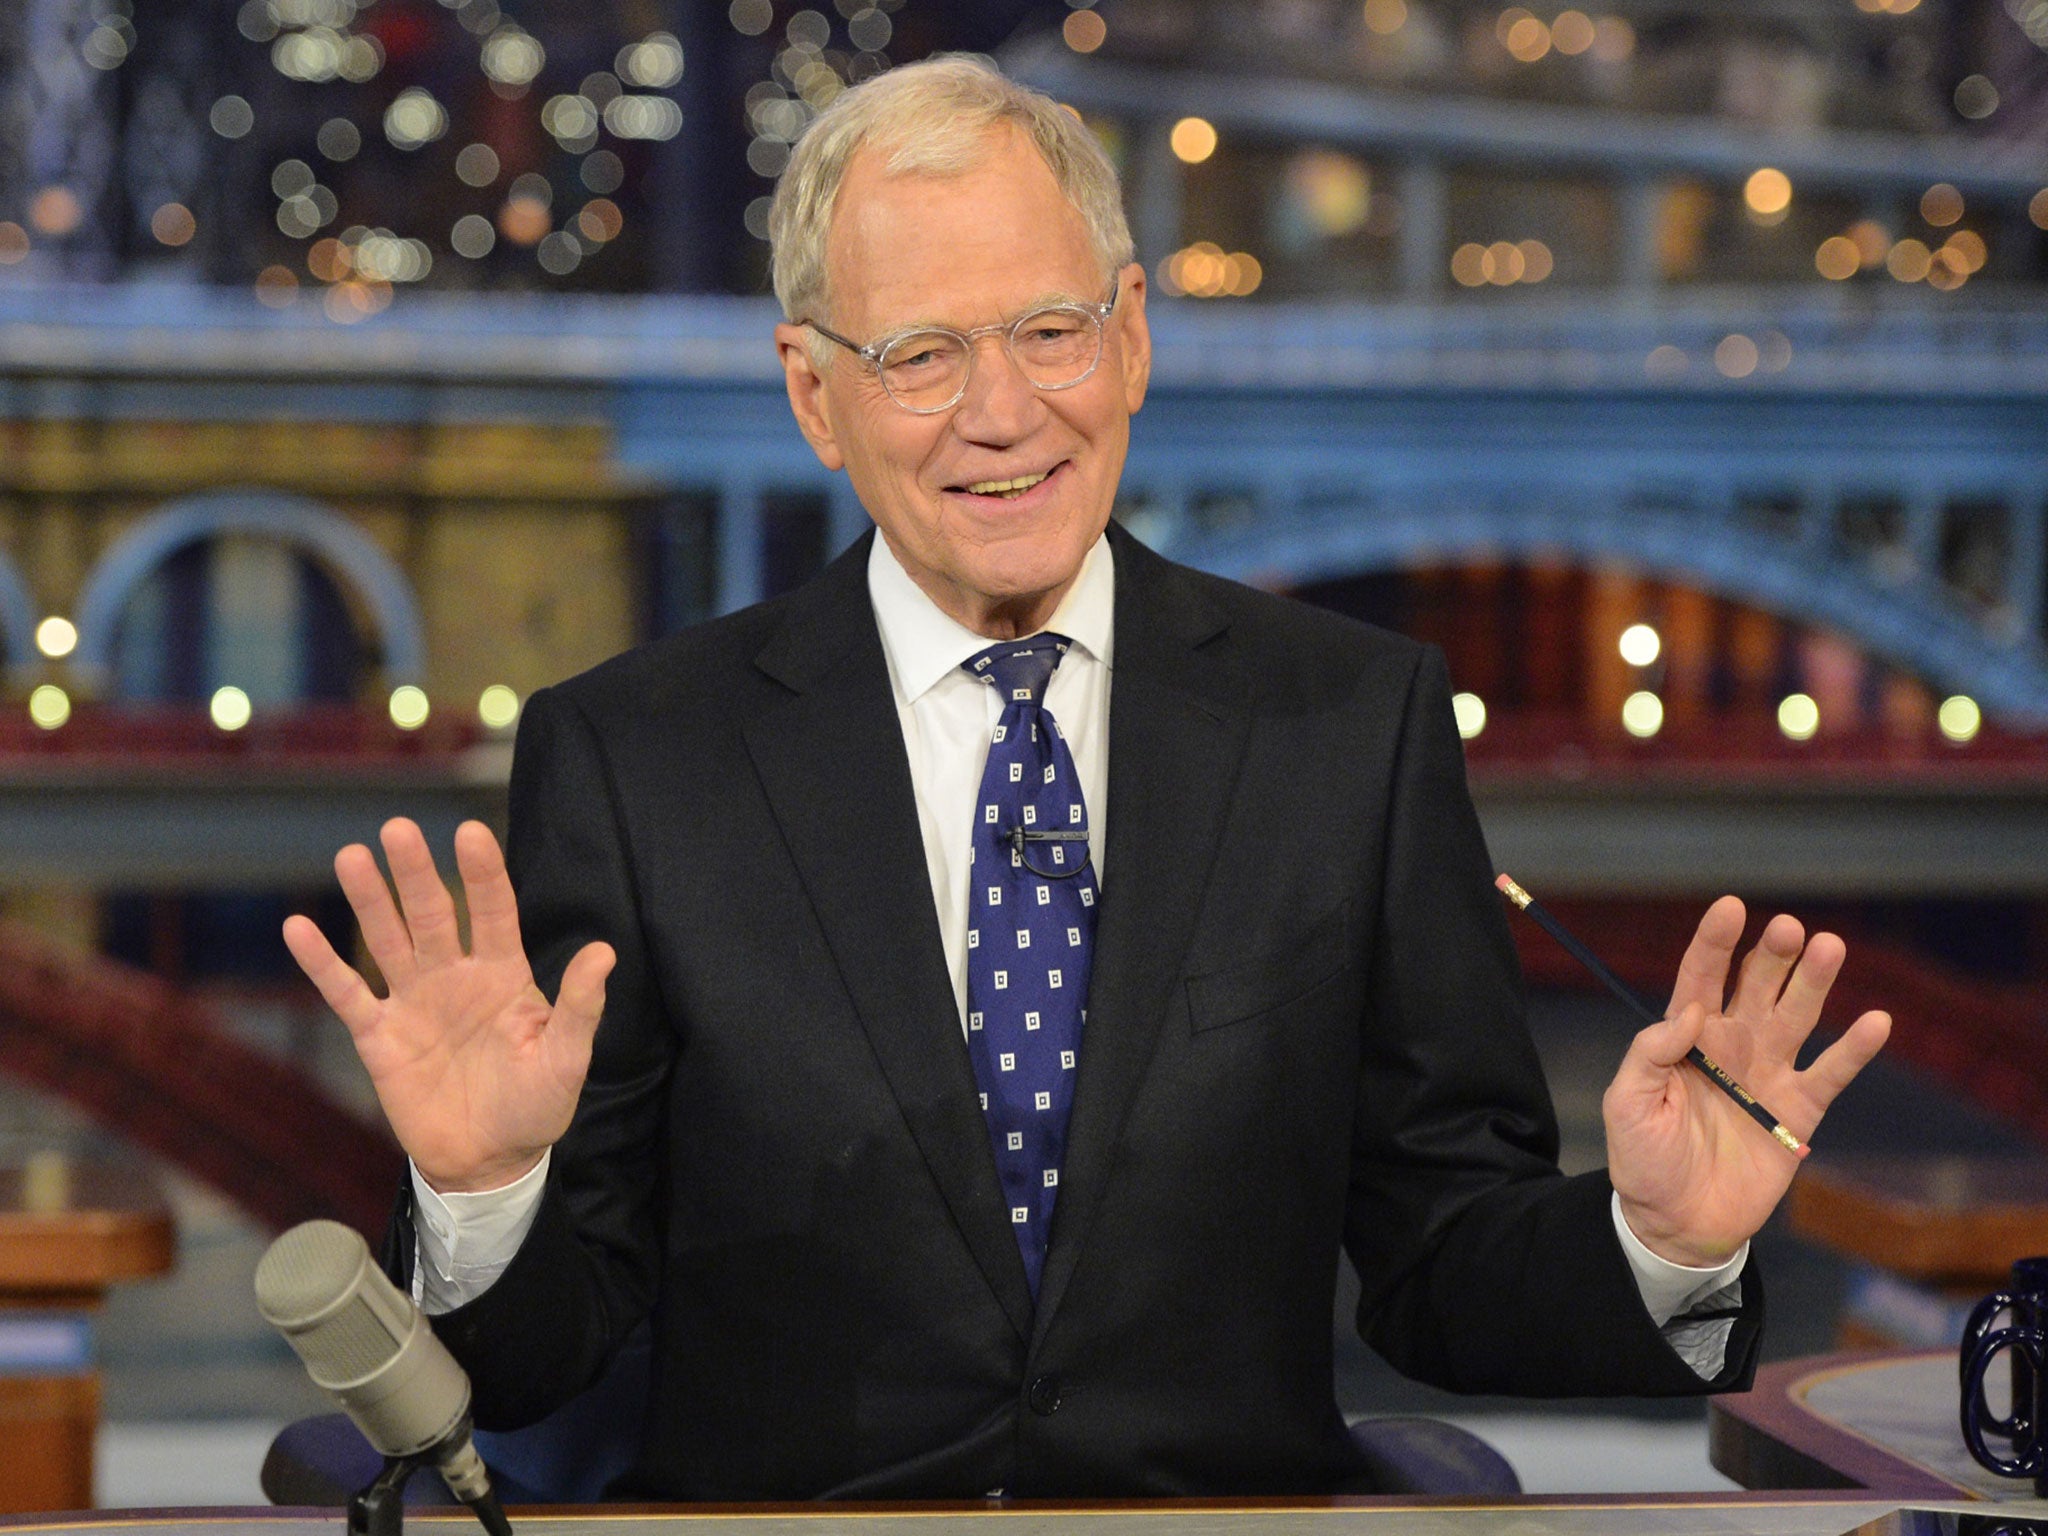 Plaudits: Letterman hosted The Late Show for 33 years